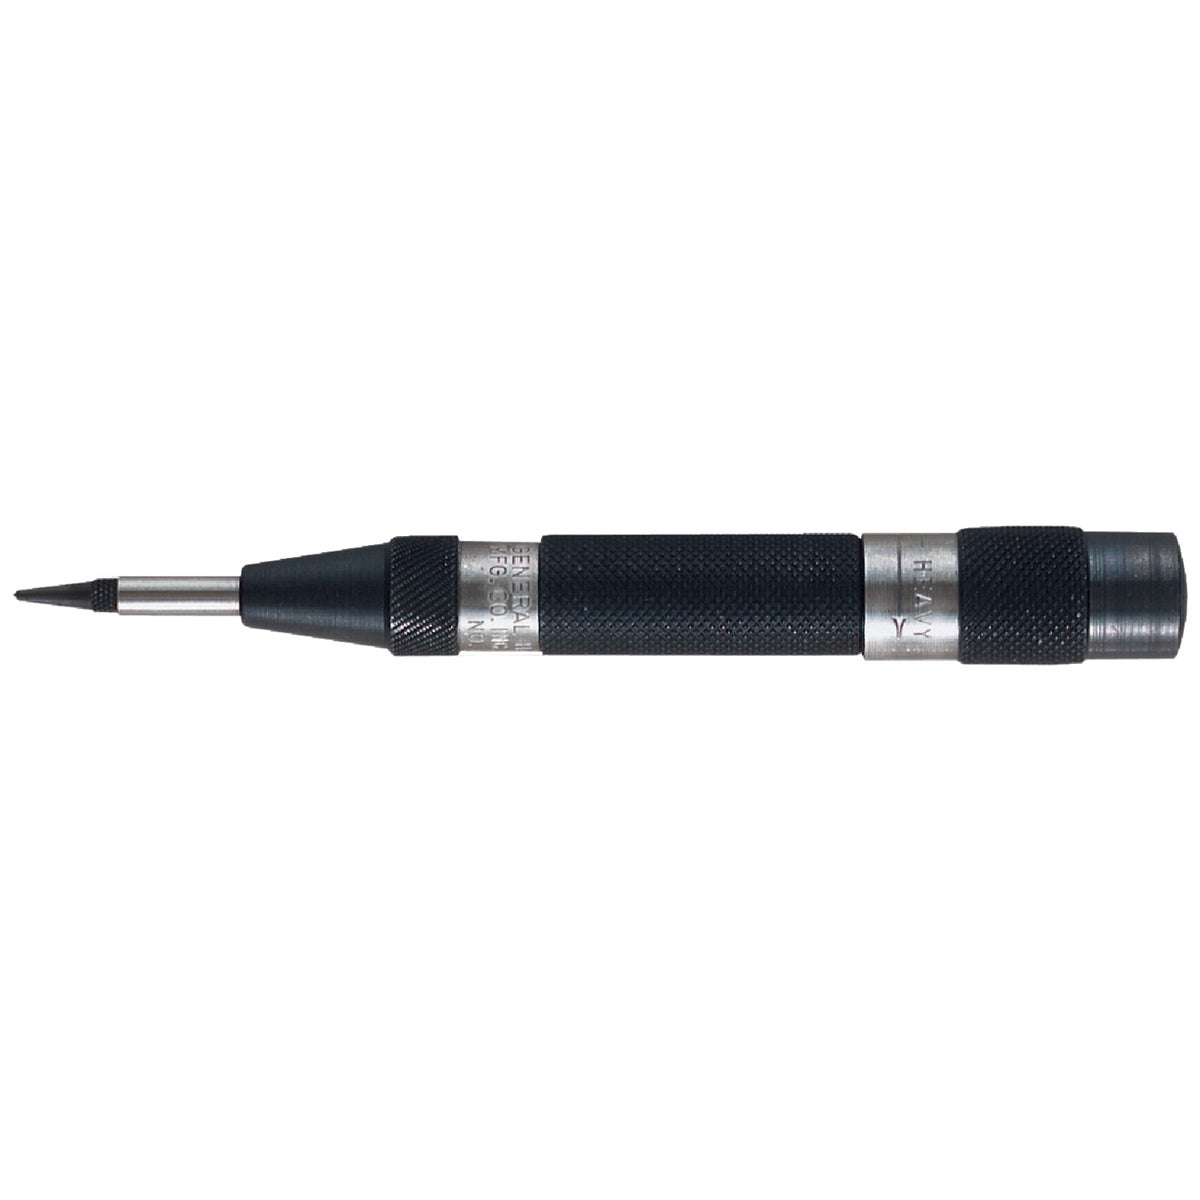 Item 318884, The #79 Mini Heavy-duty Automatic Center Punch can punch, mark, scribe and 